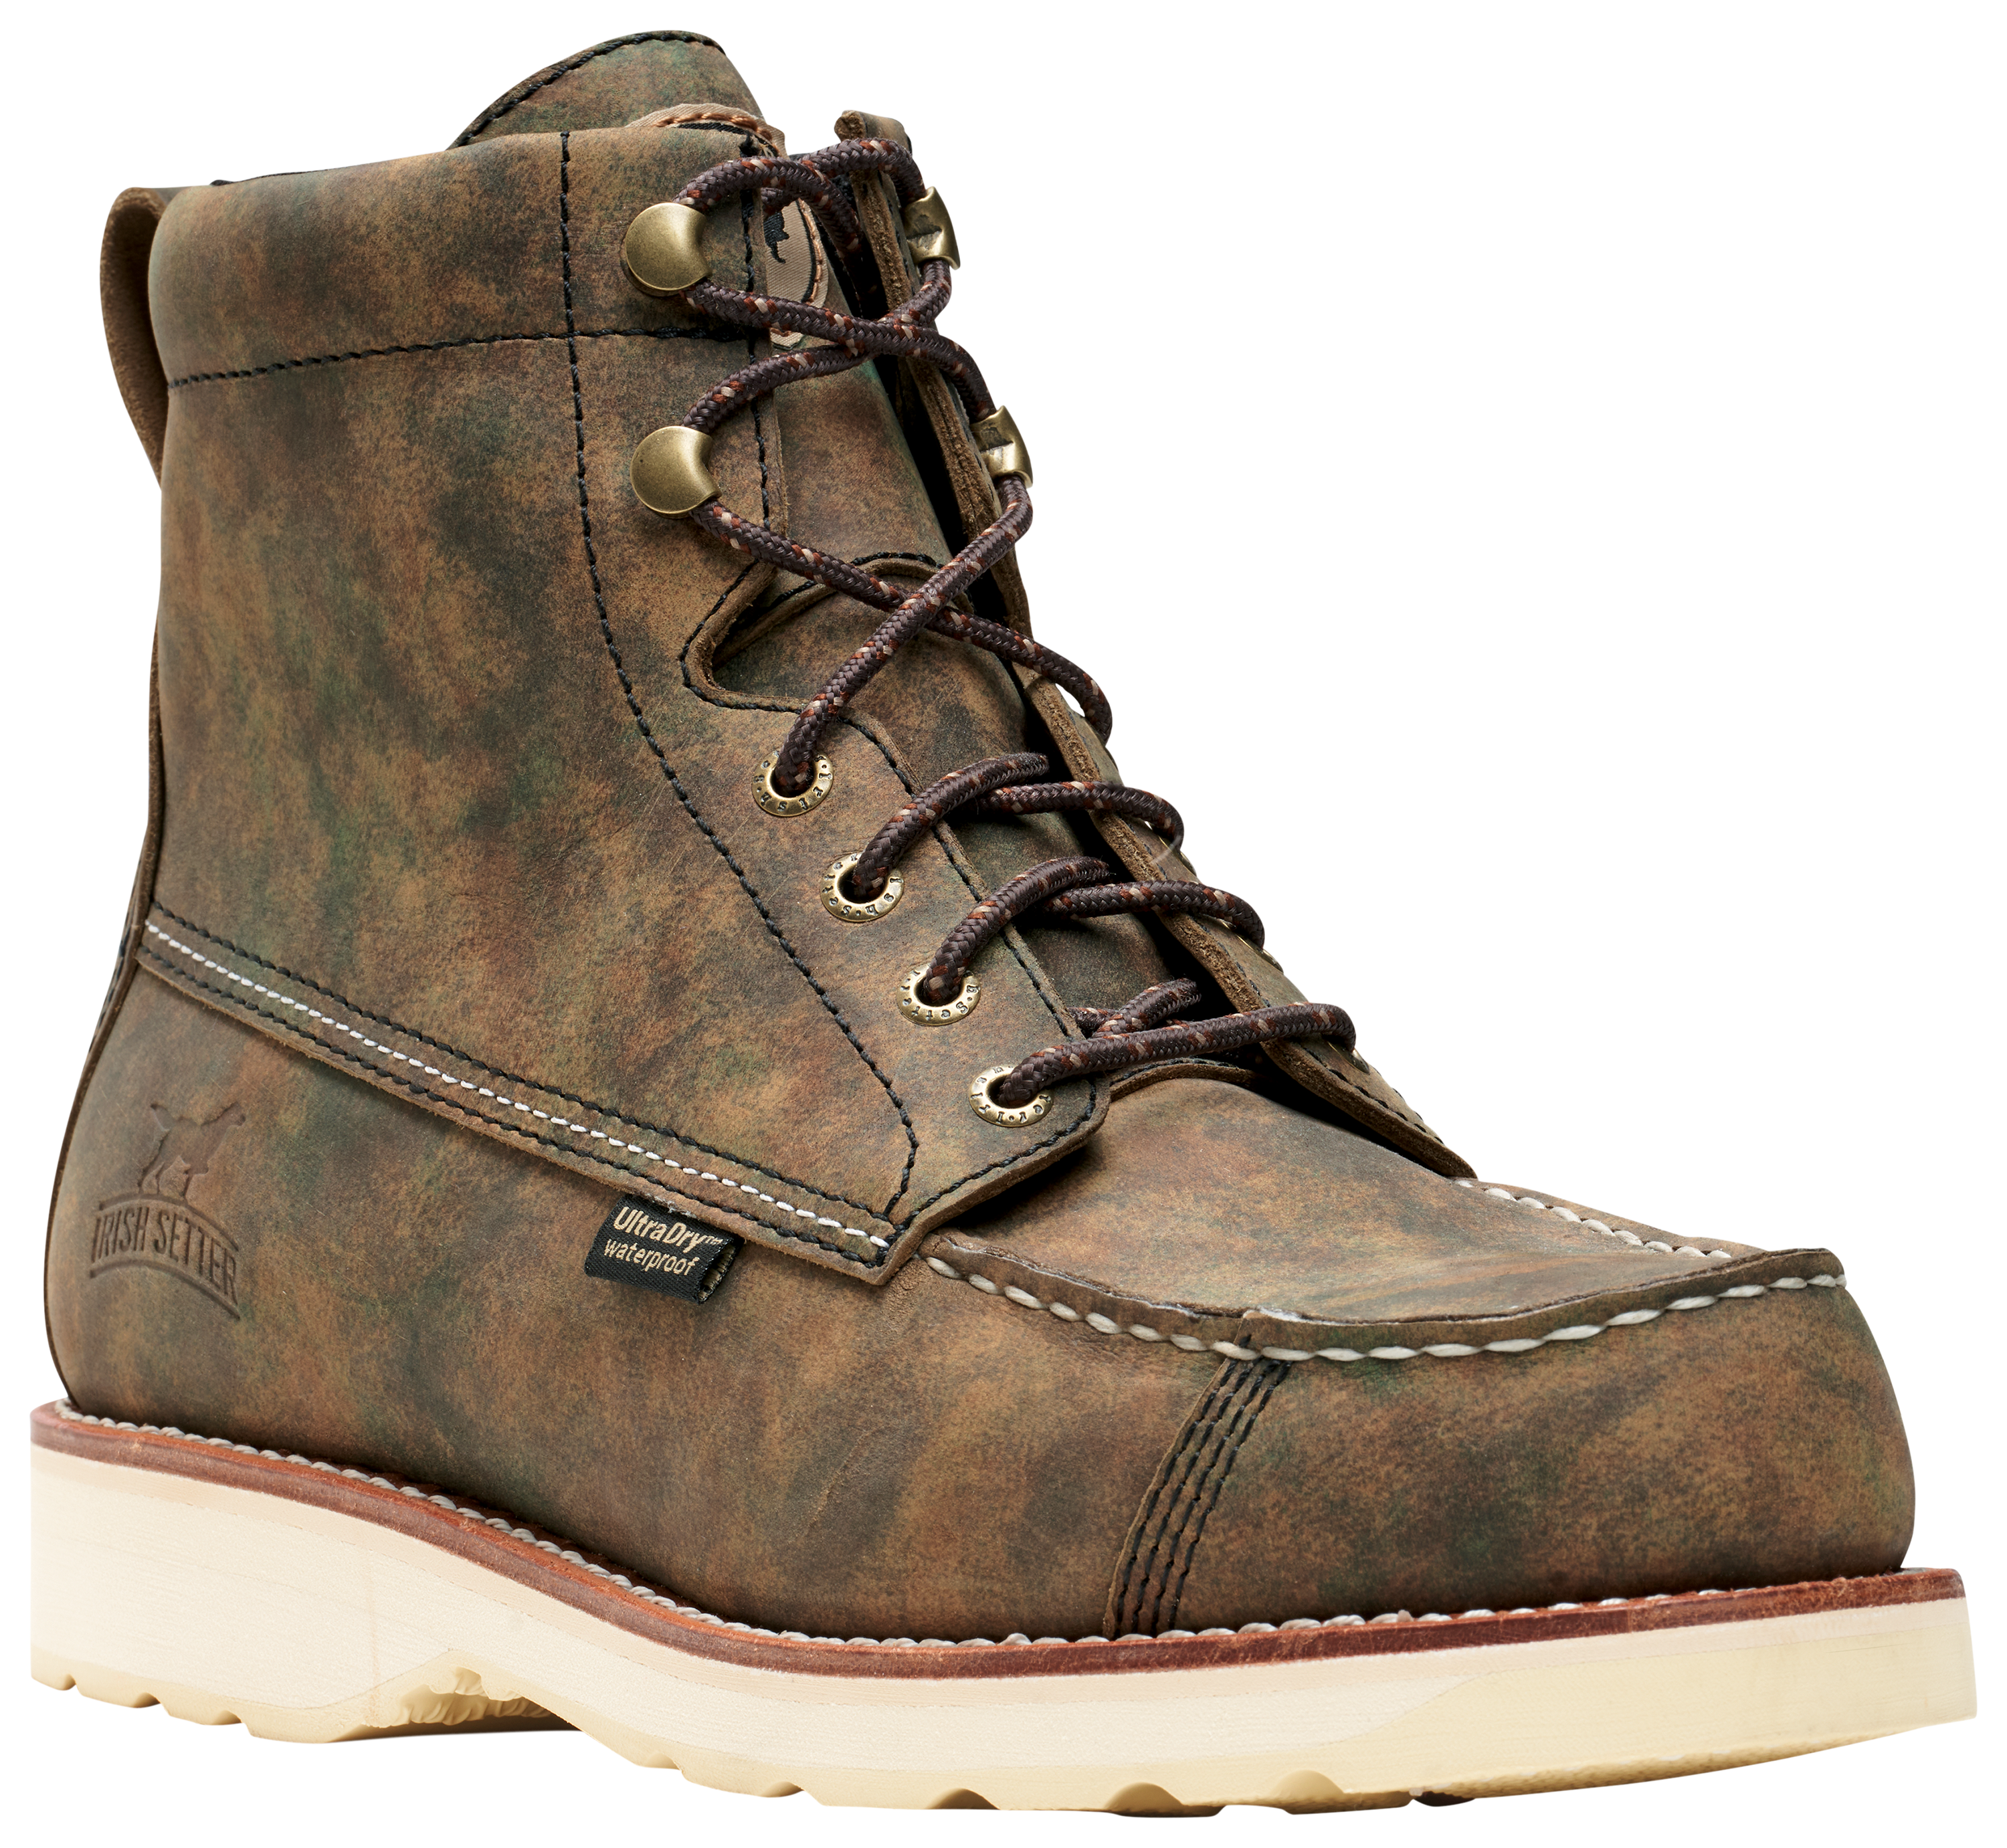 Irish Setter Wingshooter 7 Waterproof Hunting Boots for Men - Earth Camo - 13W